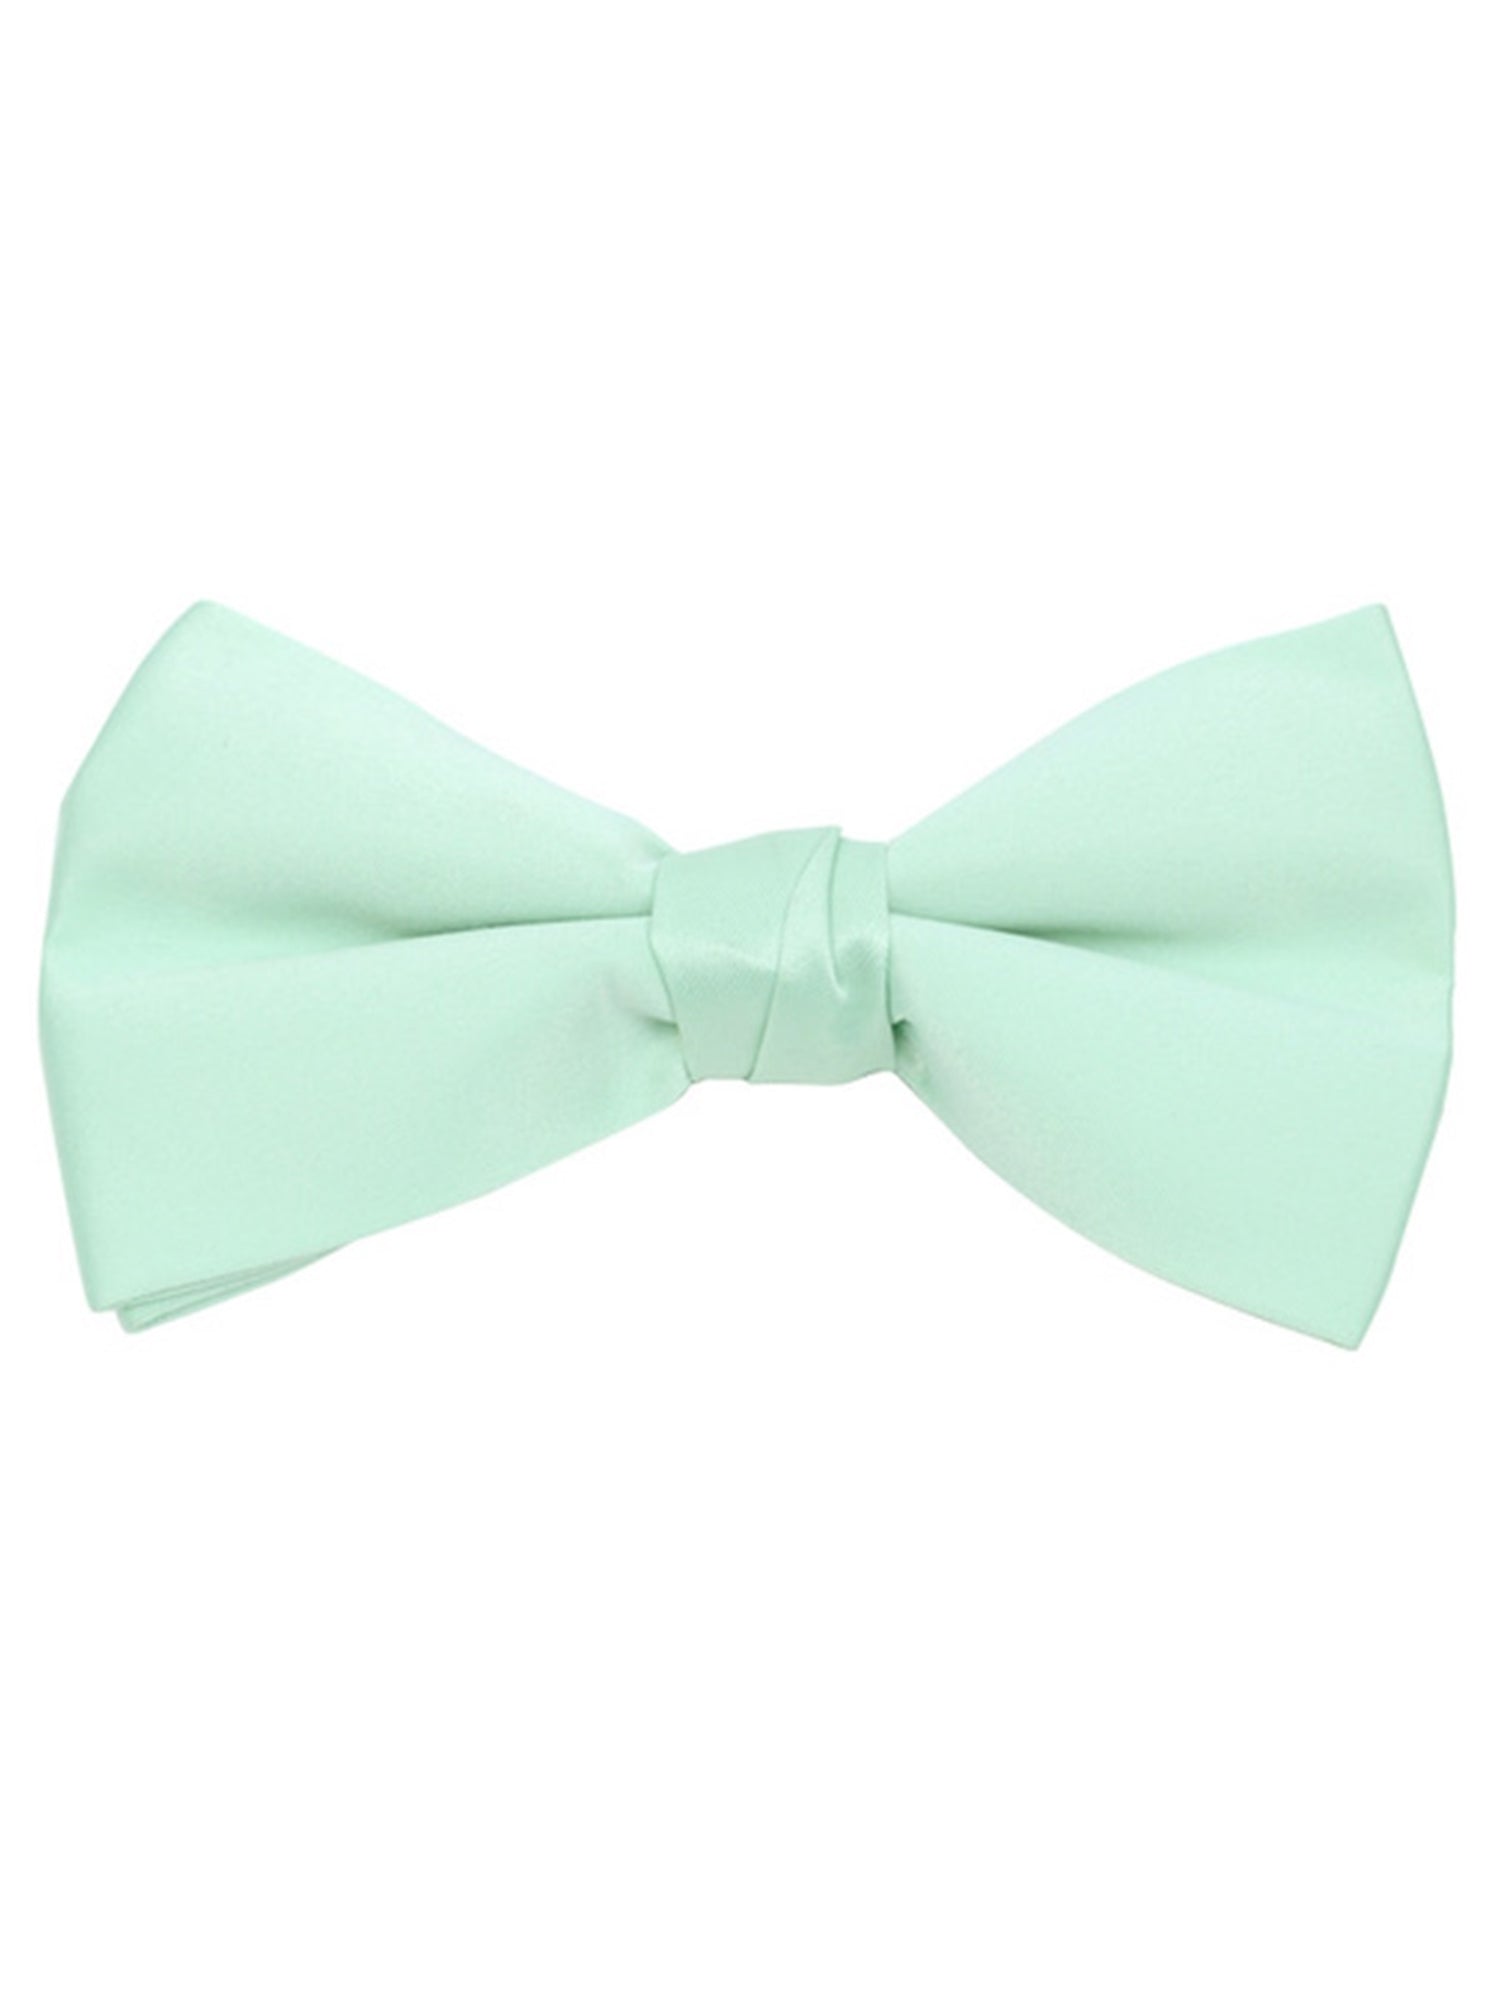 Young Boy's Pre-tied Clip On Bow Tie - Formal Tuxedo Solid Color Boy's Solid Color Bow Tie TheDapperTie Light Green One Size 